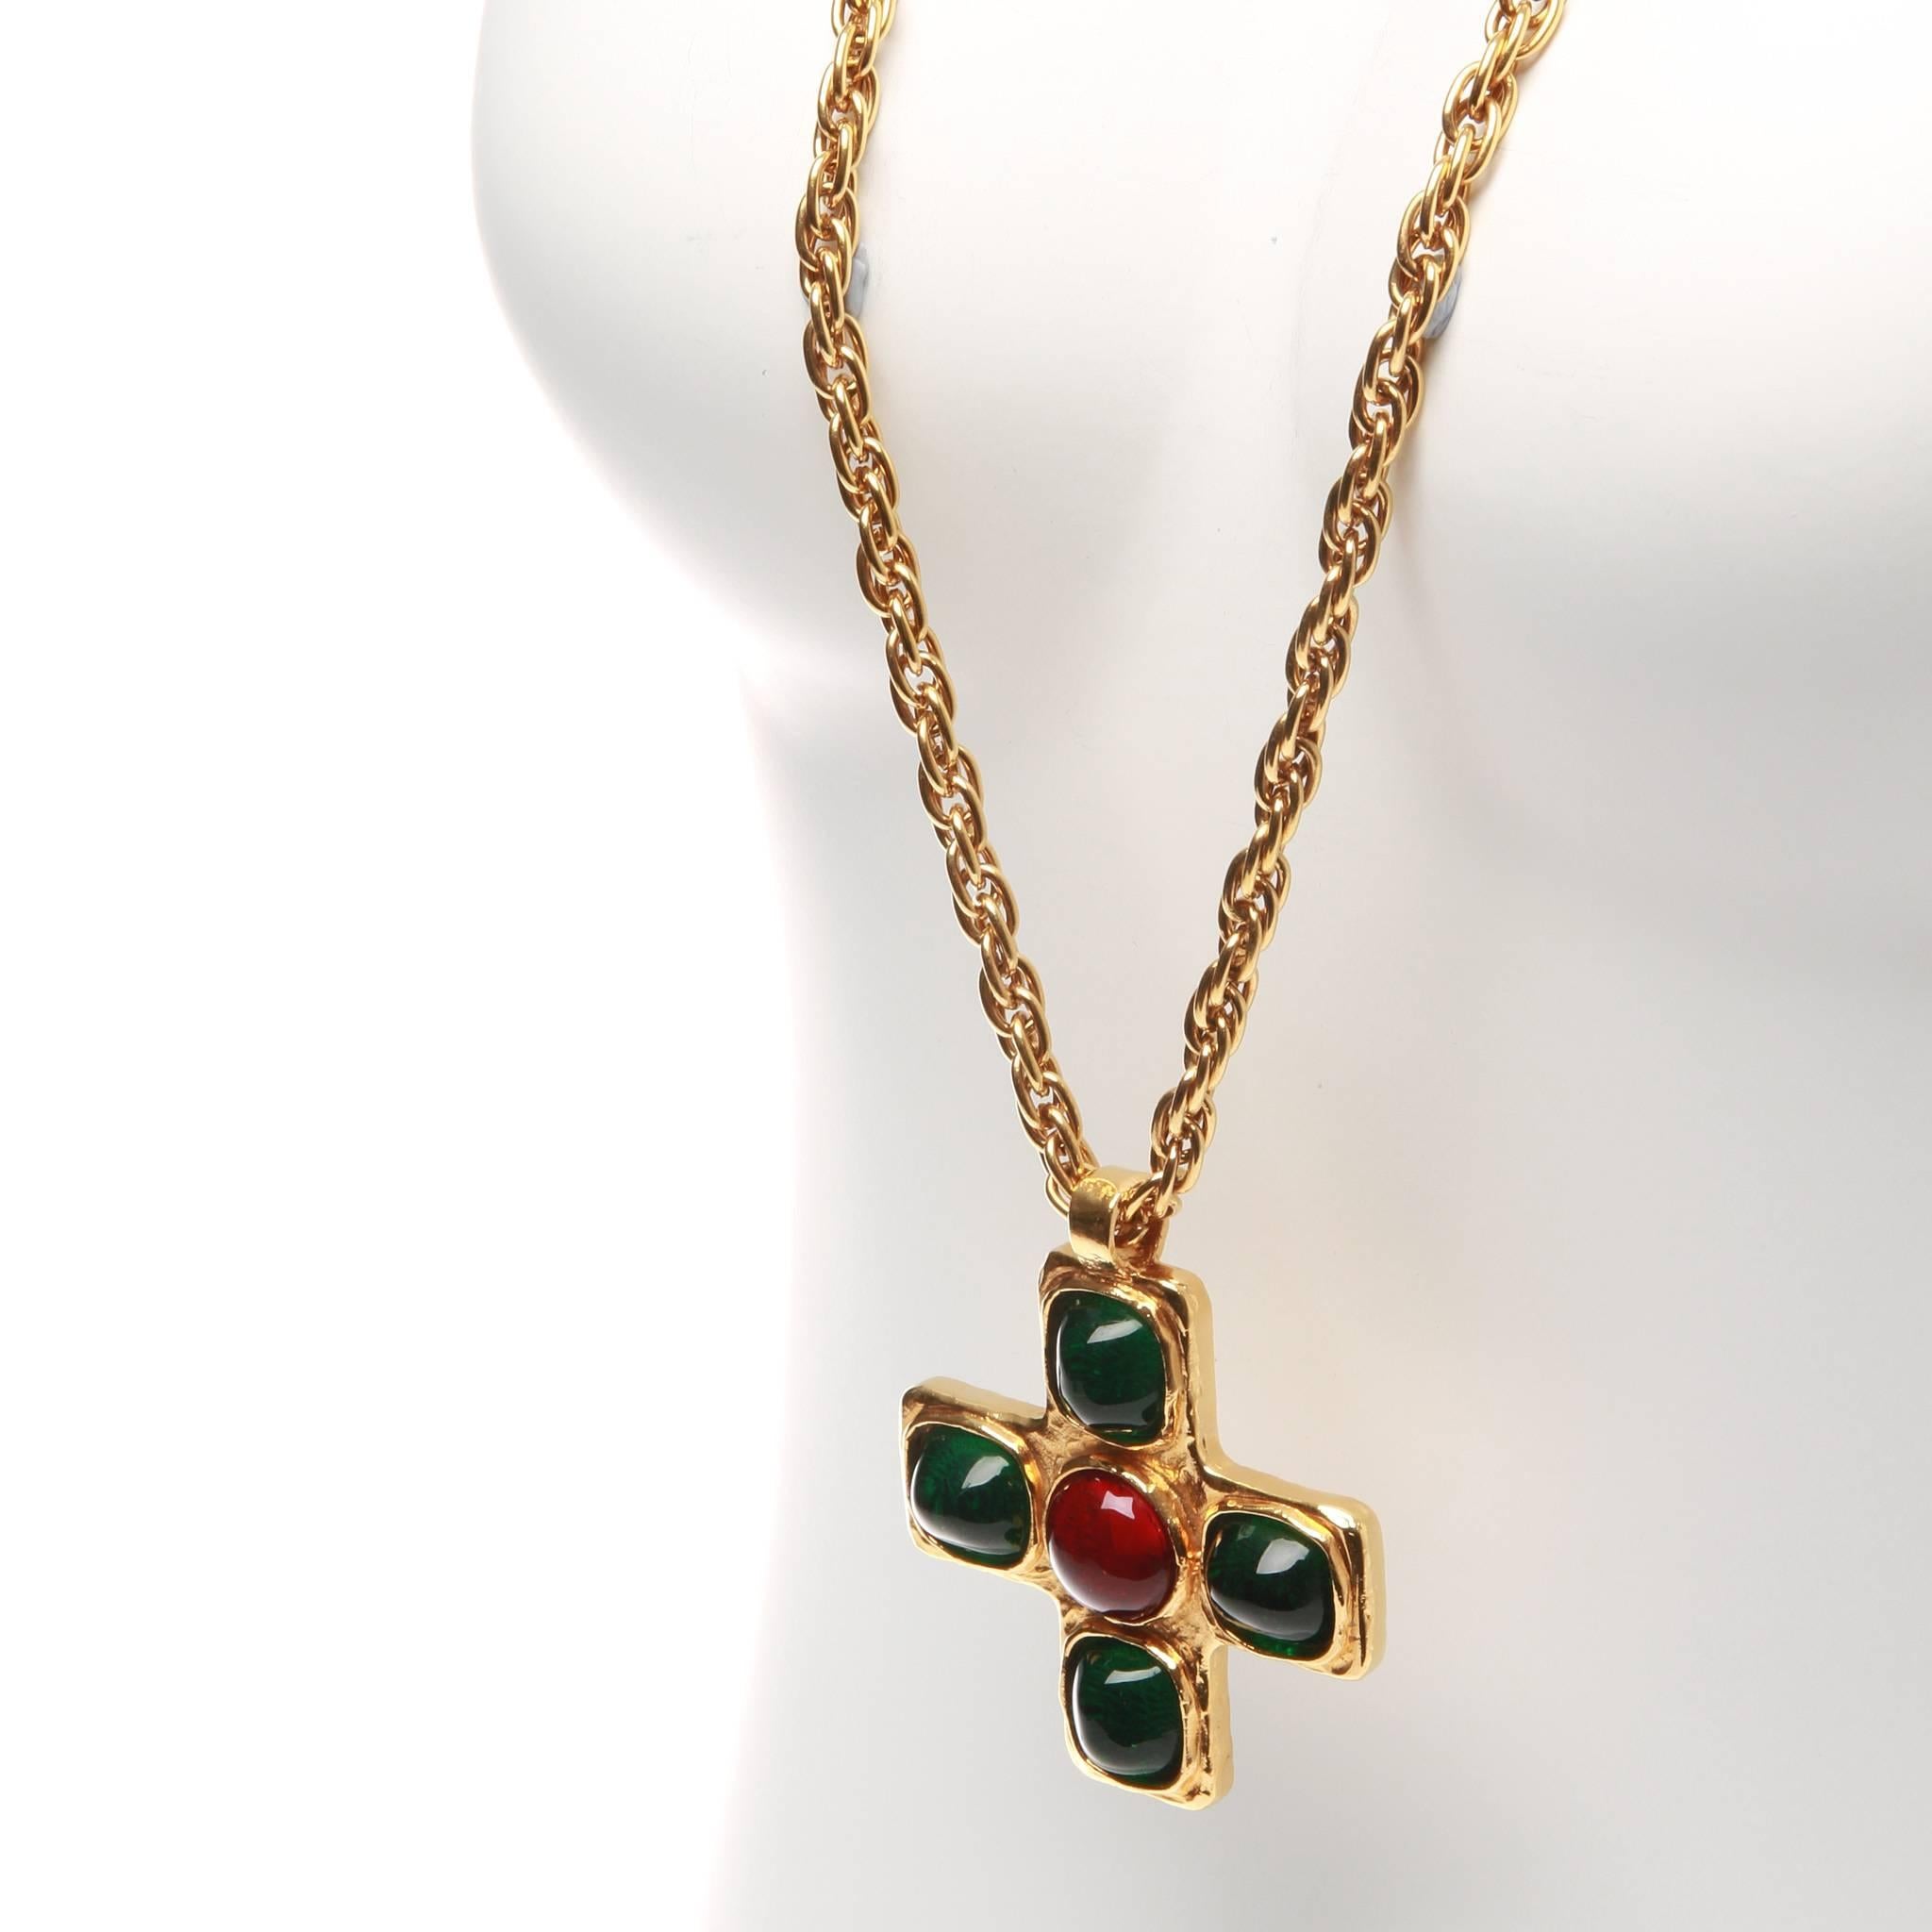 Vintage Chanel Byzantine cross necklace featuring green and red Gripoix in a gold-tone setting. 

Measurements: The necklace has a 17